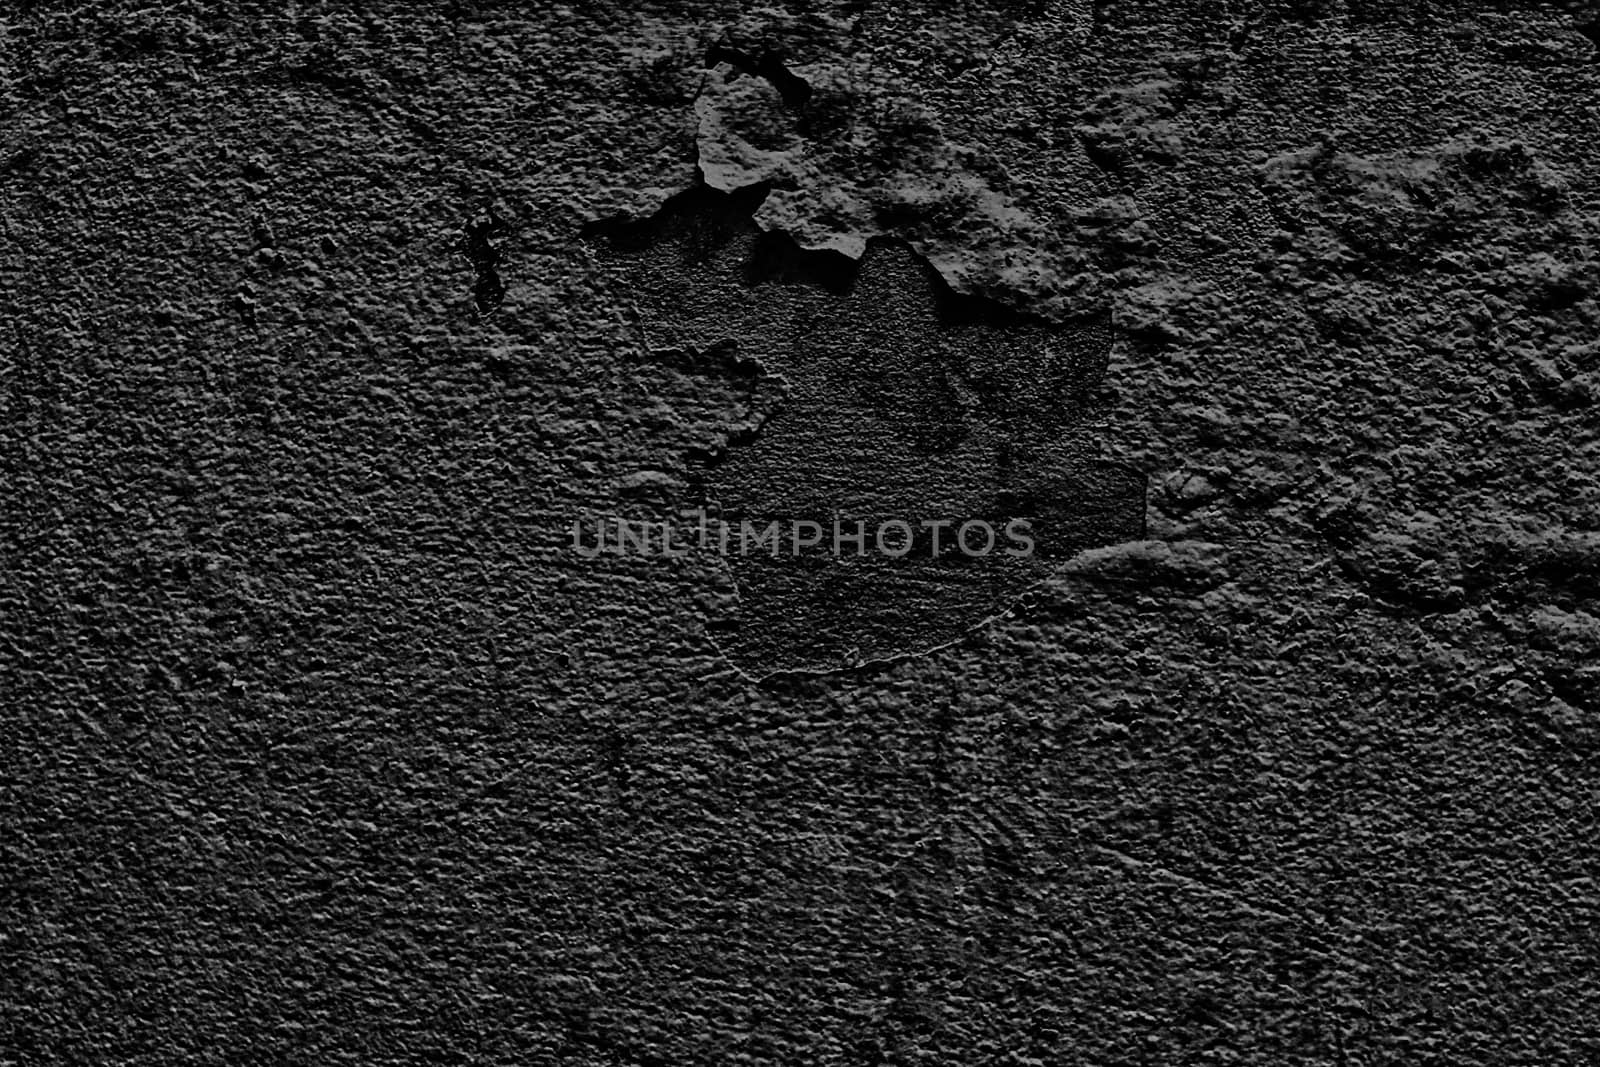 Black color Paint peeling cuticles on textured Wall plaster Siemens, Background Cracked walls inbreeding, Abstract wall Black background texture by cgdeaw